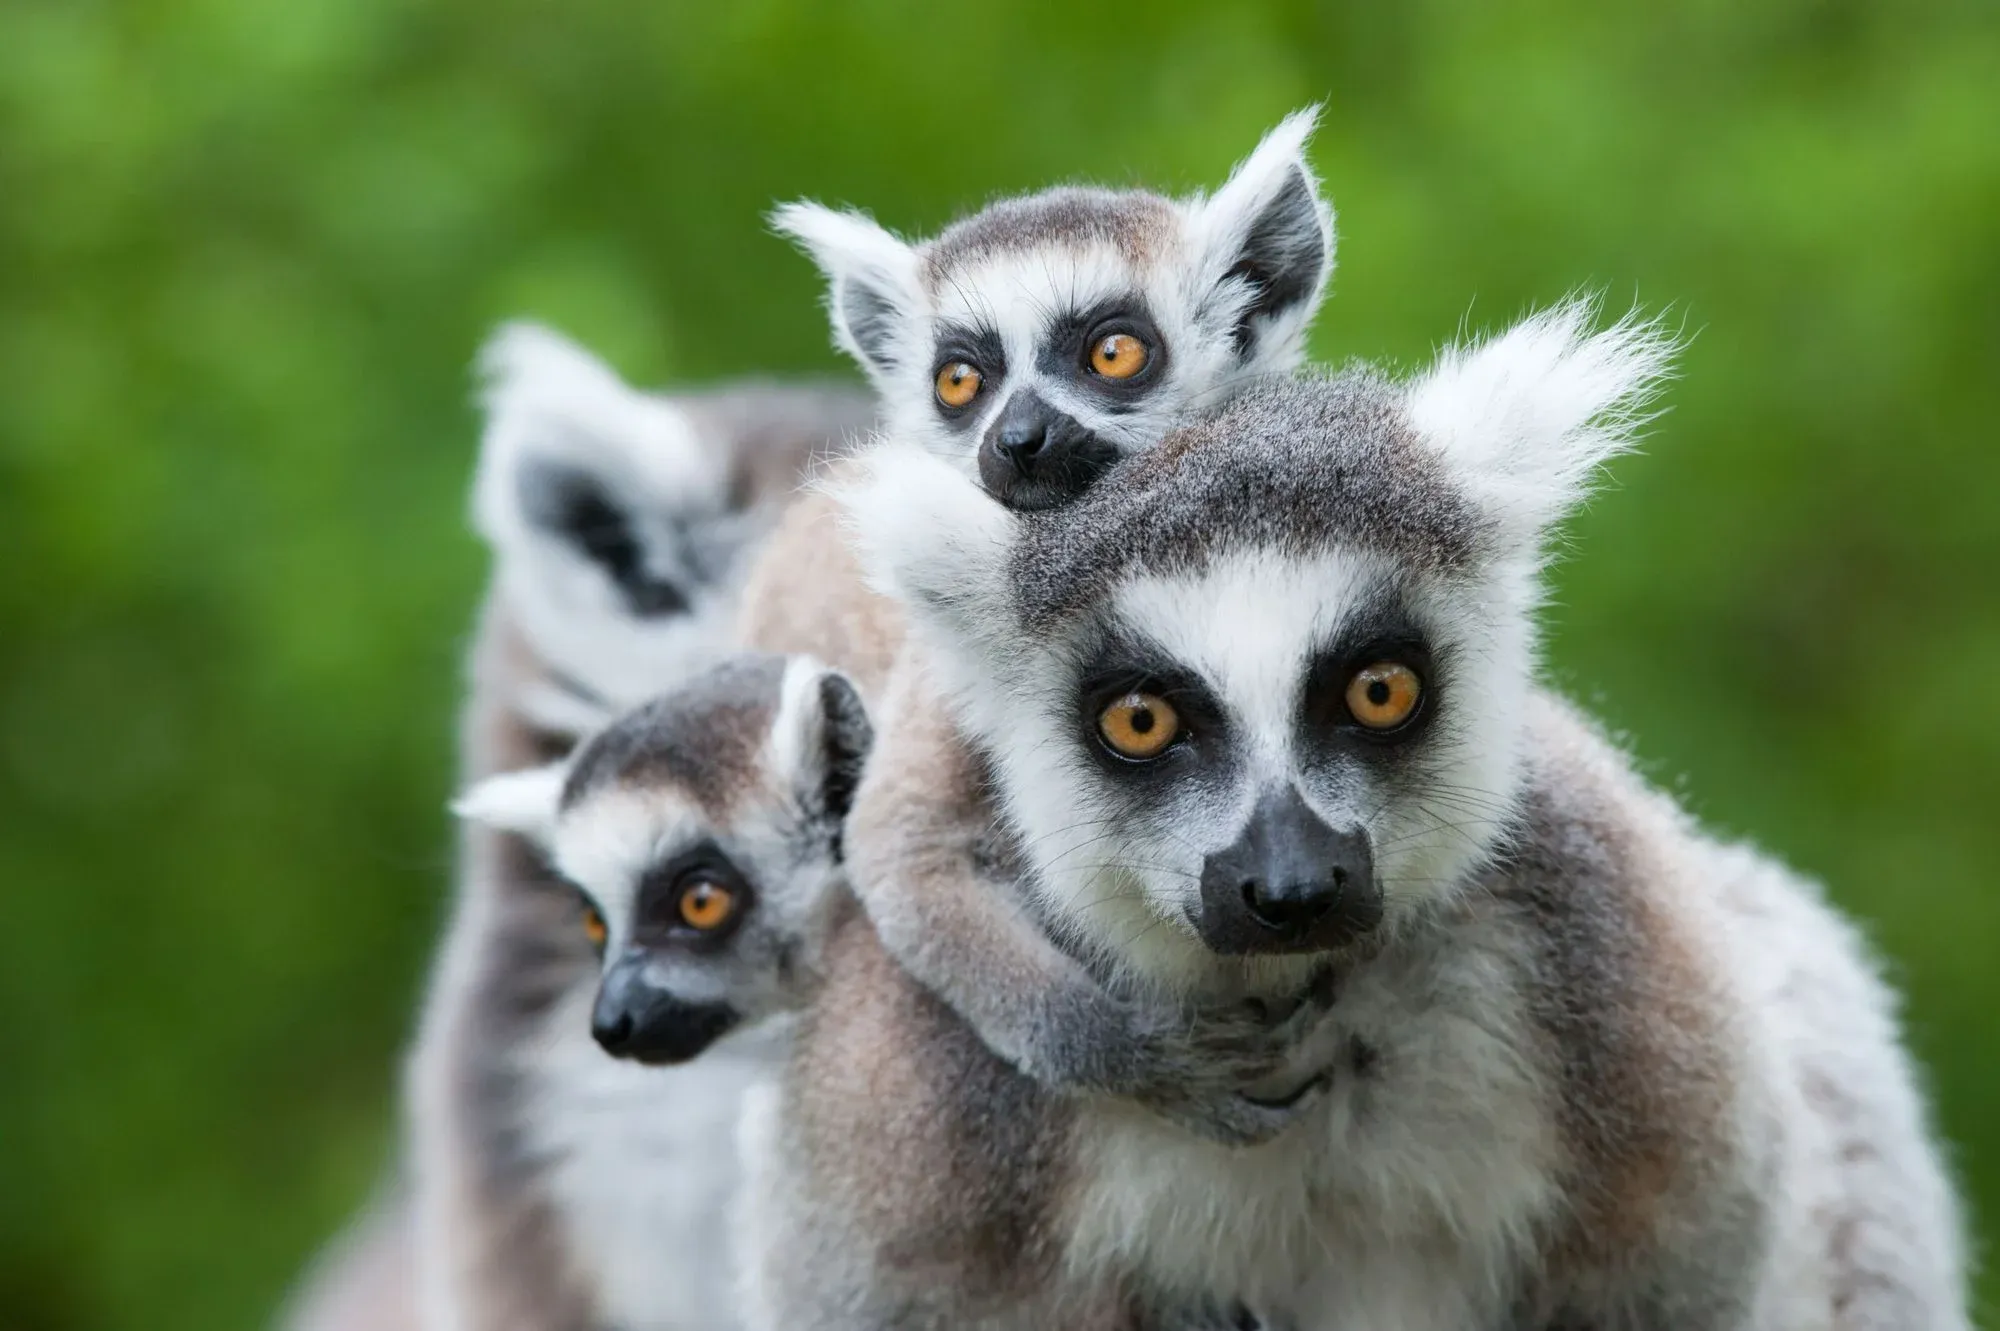 A family of ring-tailed lemurs in Madagascar. Photo: Getty